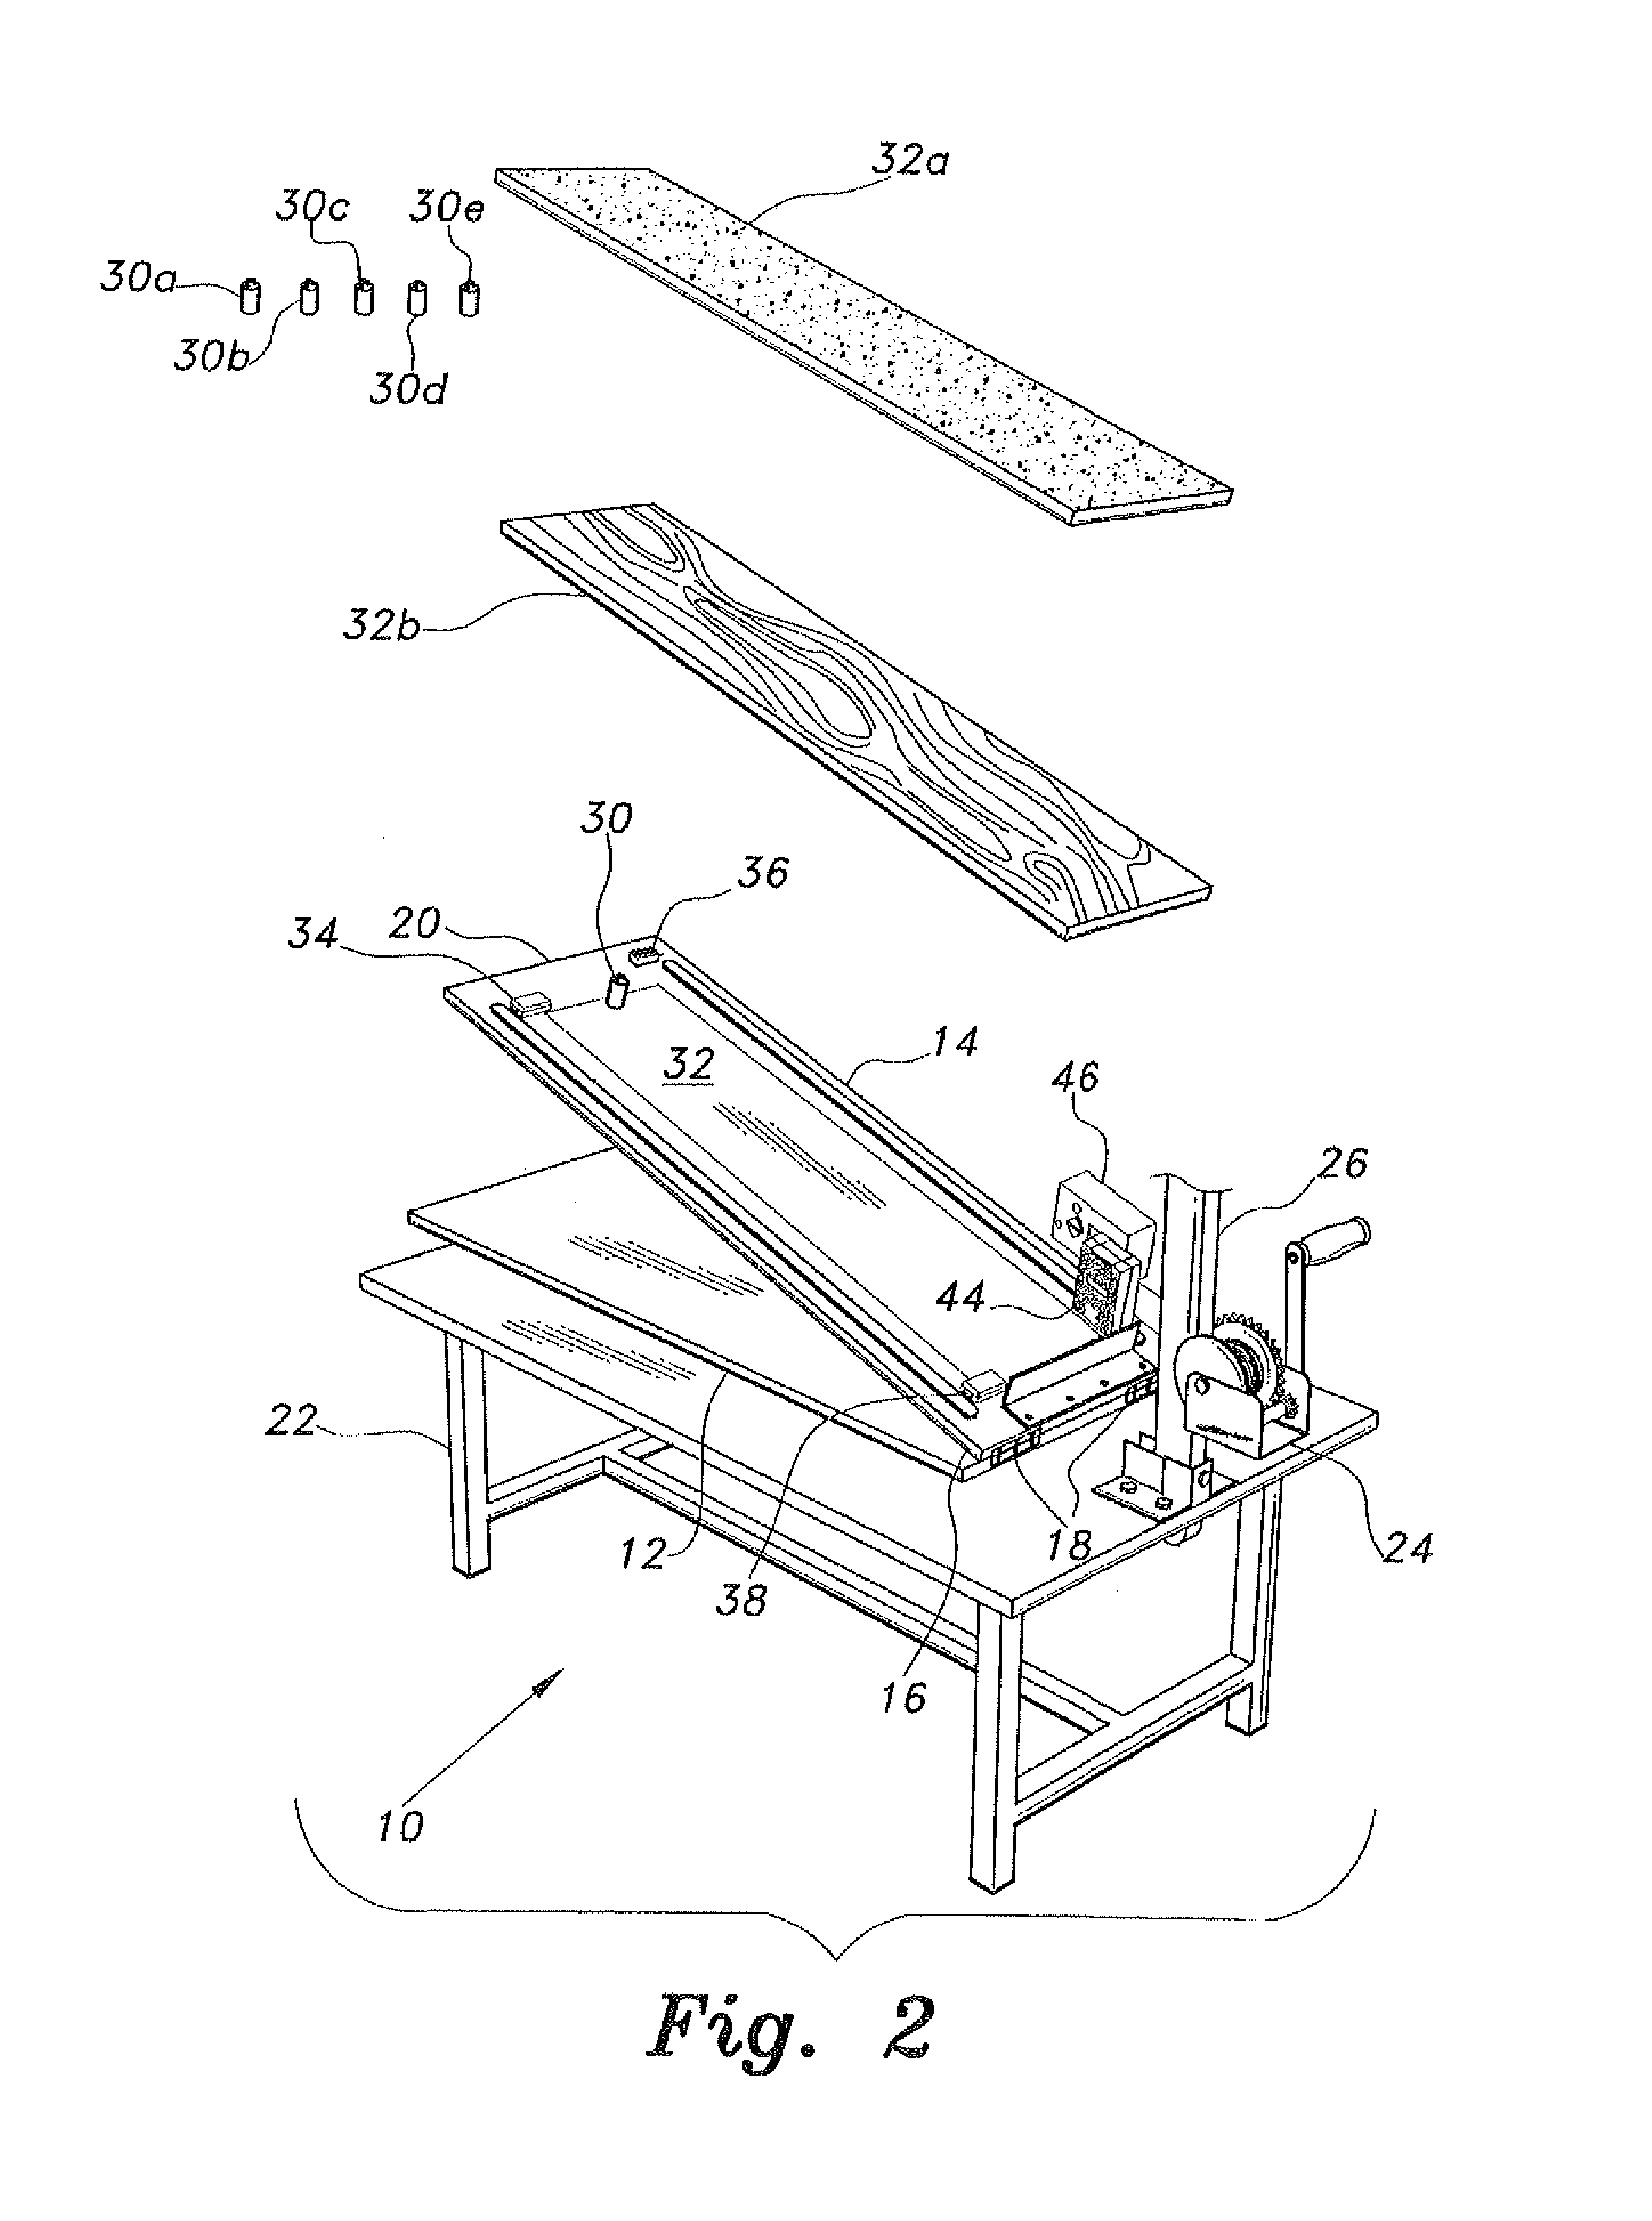 Apparatus for determining coefficients of friction